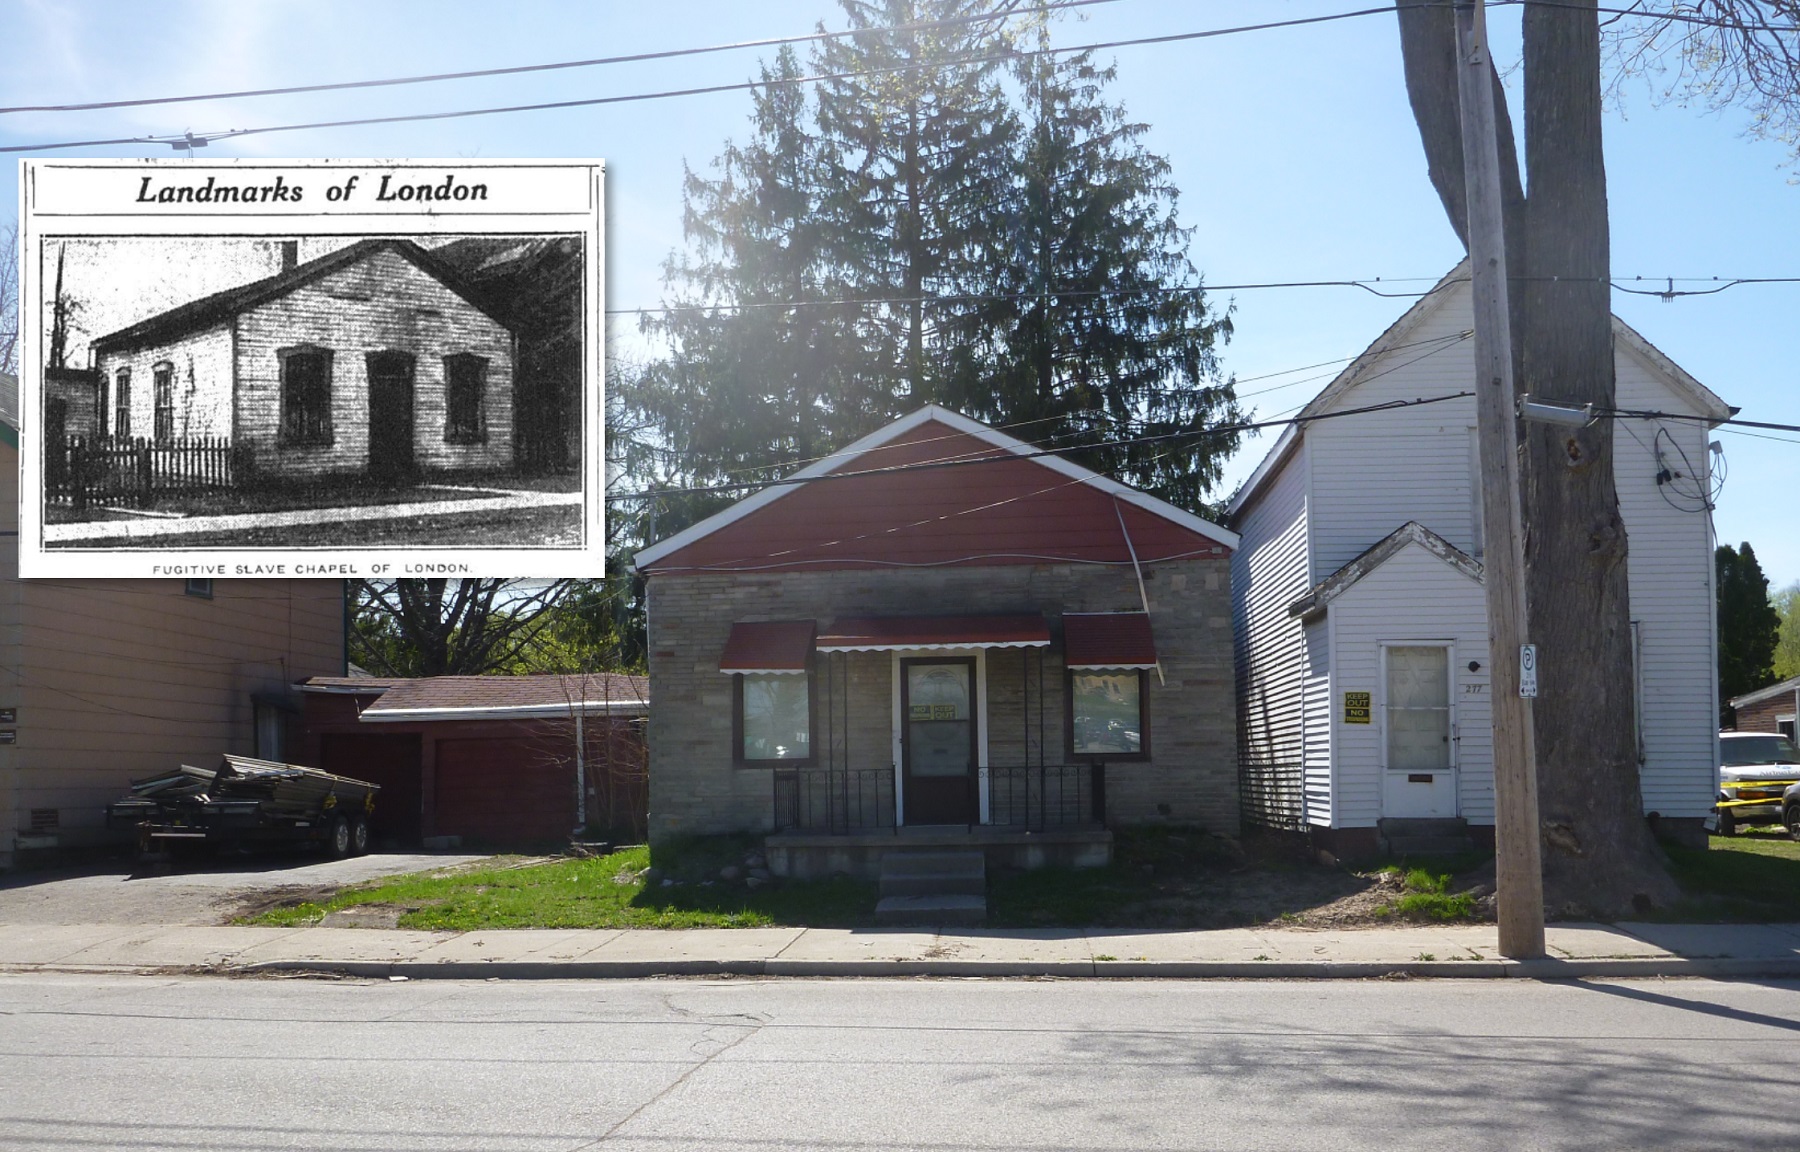 One of the last images of the Fugitive Slave Chapel on its original lit. An inset of a newspaper clipping image from the 1920s is also shown. The building's exterior siding and windows have changed in the intervening period.